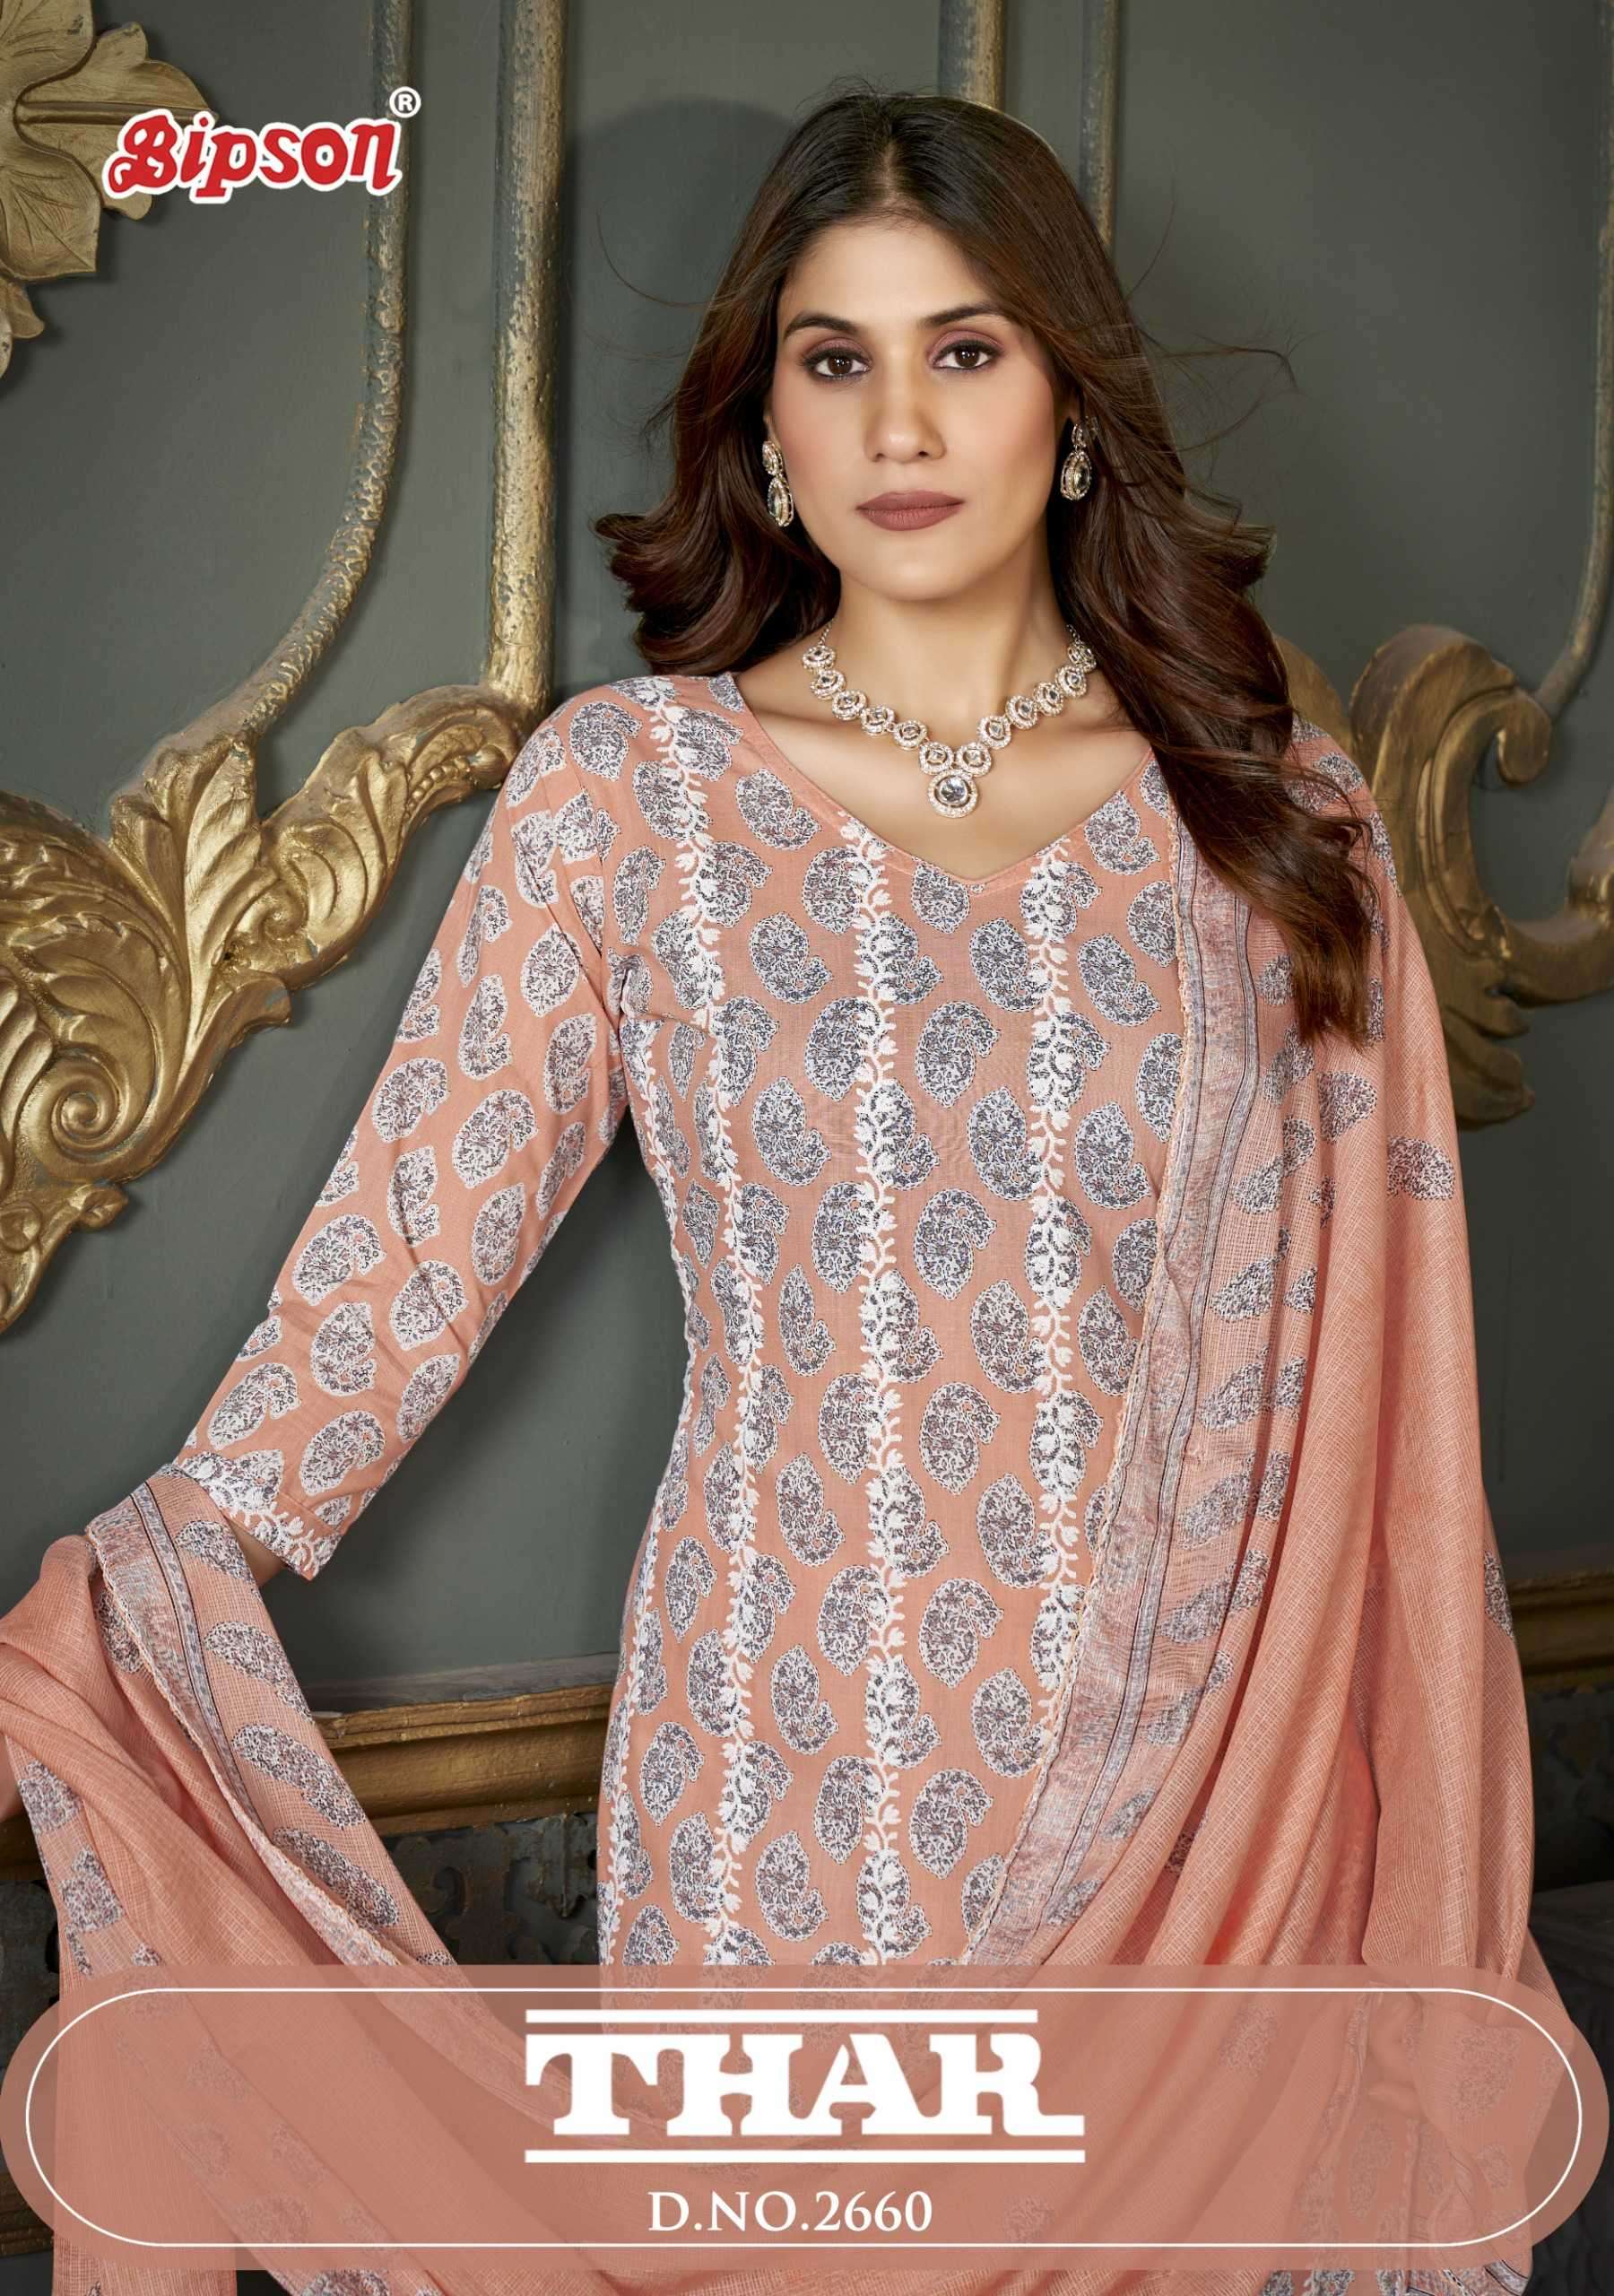 bipson thar 2660 Pure Cotton Print With White Thread Embroidery Work suit